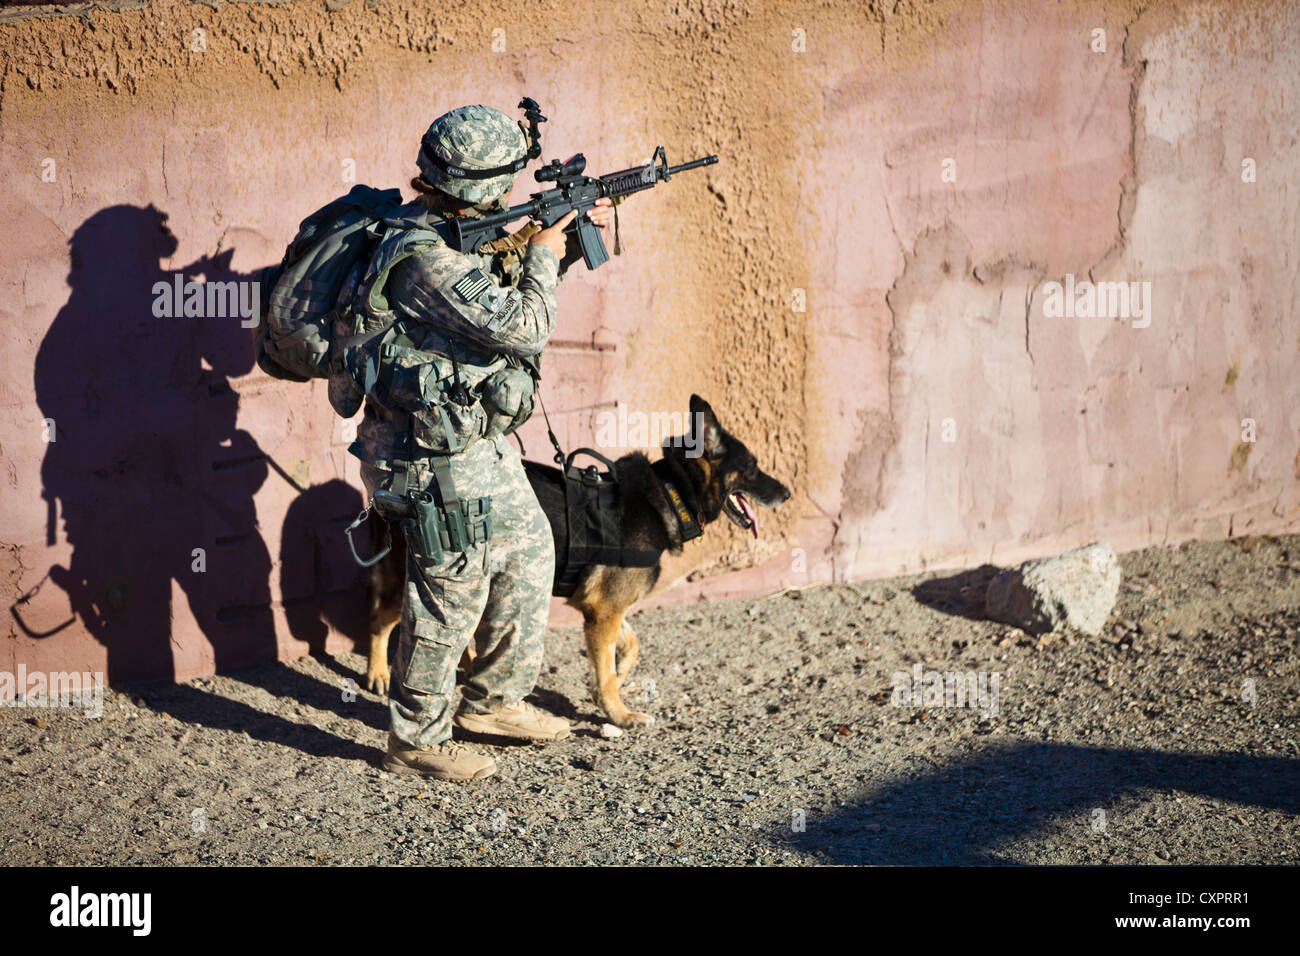 A US Army Sergeant with her Military Working Dog Jalk on patrol September 20, 2012 at the US Army Yuma Proving Grounds during the Inter-service Advanced Skills K-9 Course. The three-week course which trains Military Working Dog teams for deployments to austere environments such as Afghanistan, preparing them for the life-saving role they will perform searching for improvised explosive devices and bomb making materials. Stock Photo